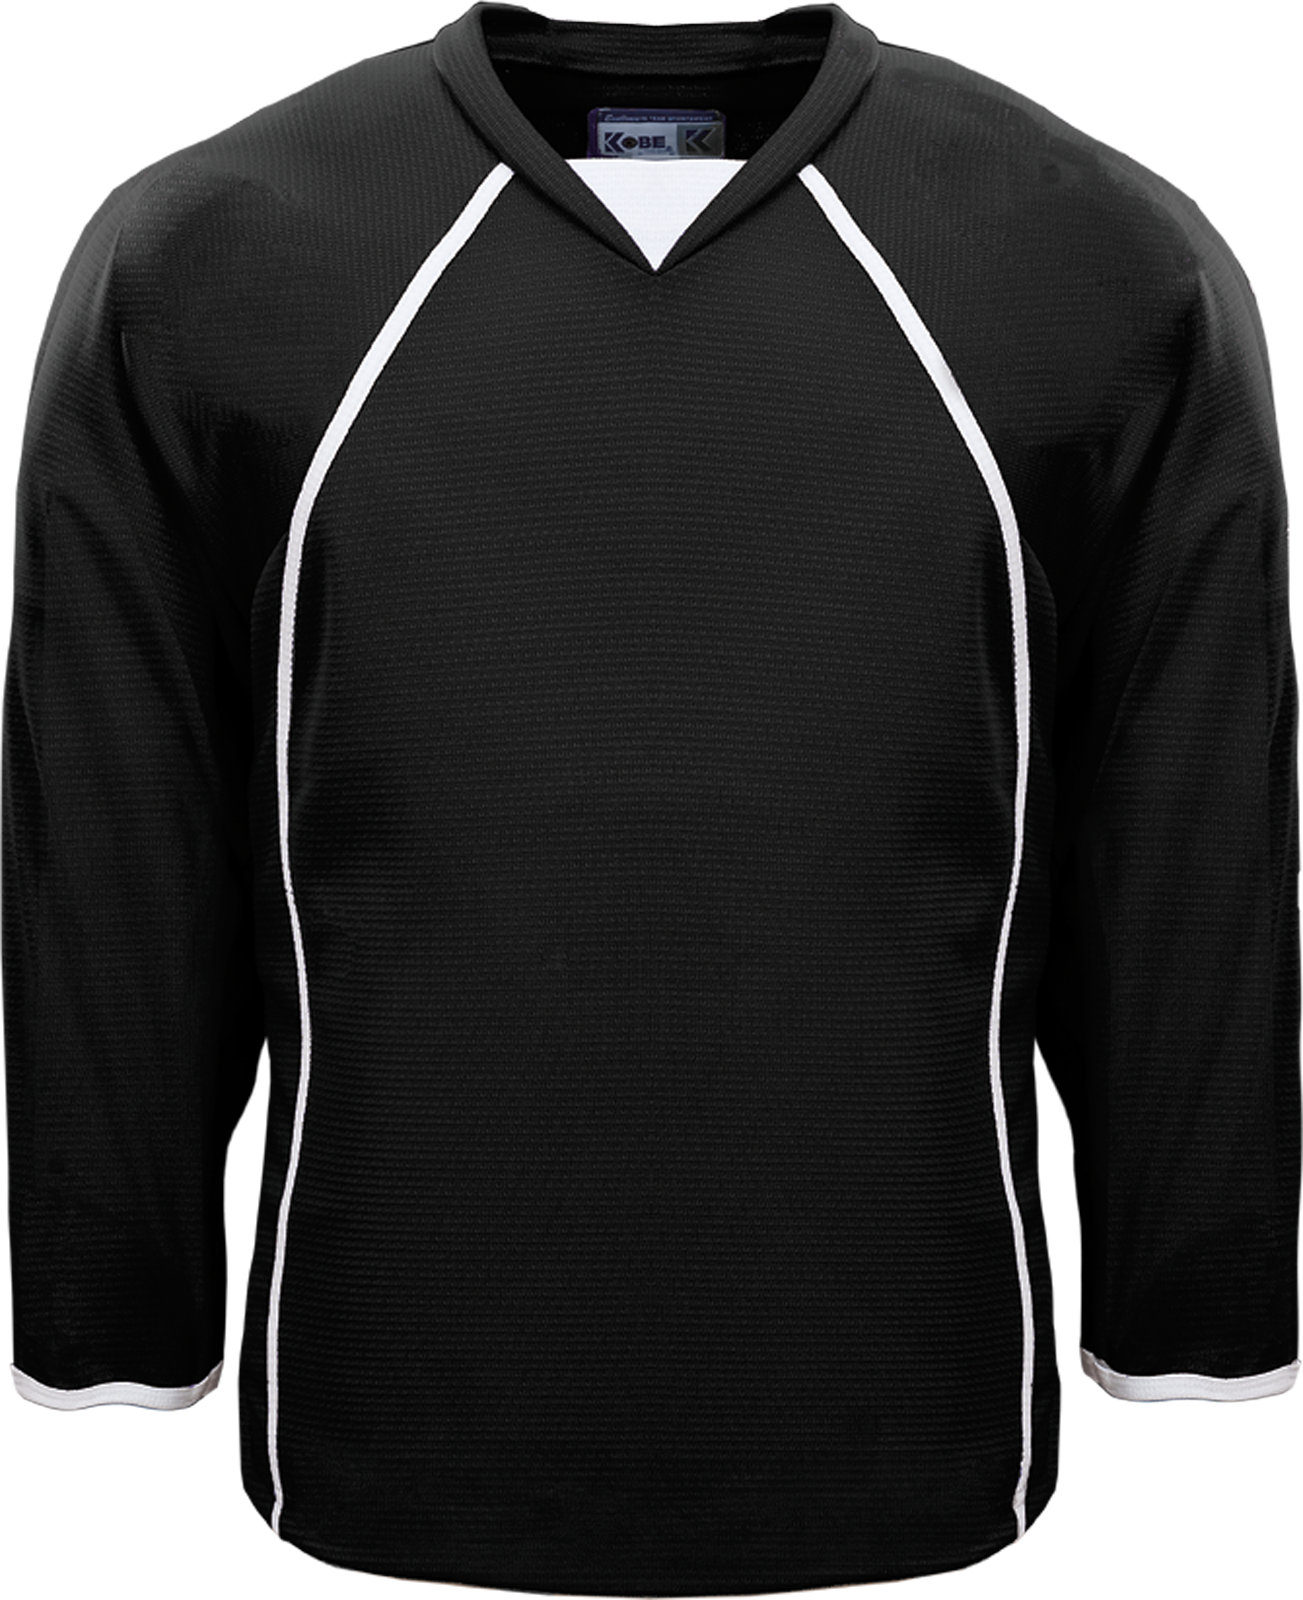 K3G AMATEUR SERIES PRACTICE JERSEY – YOUTH